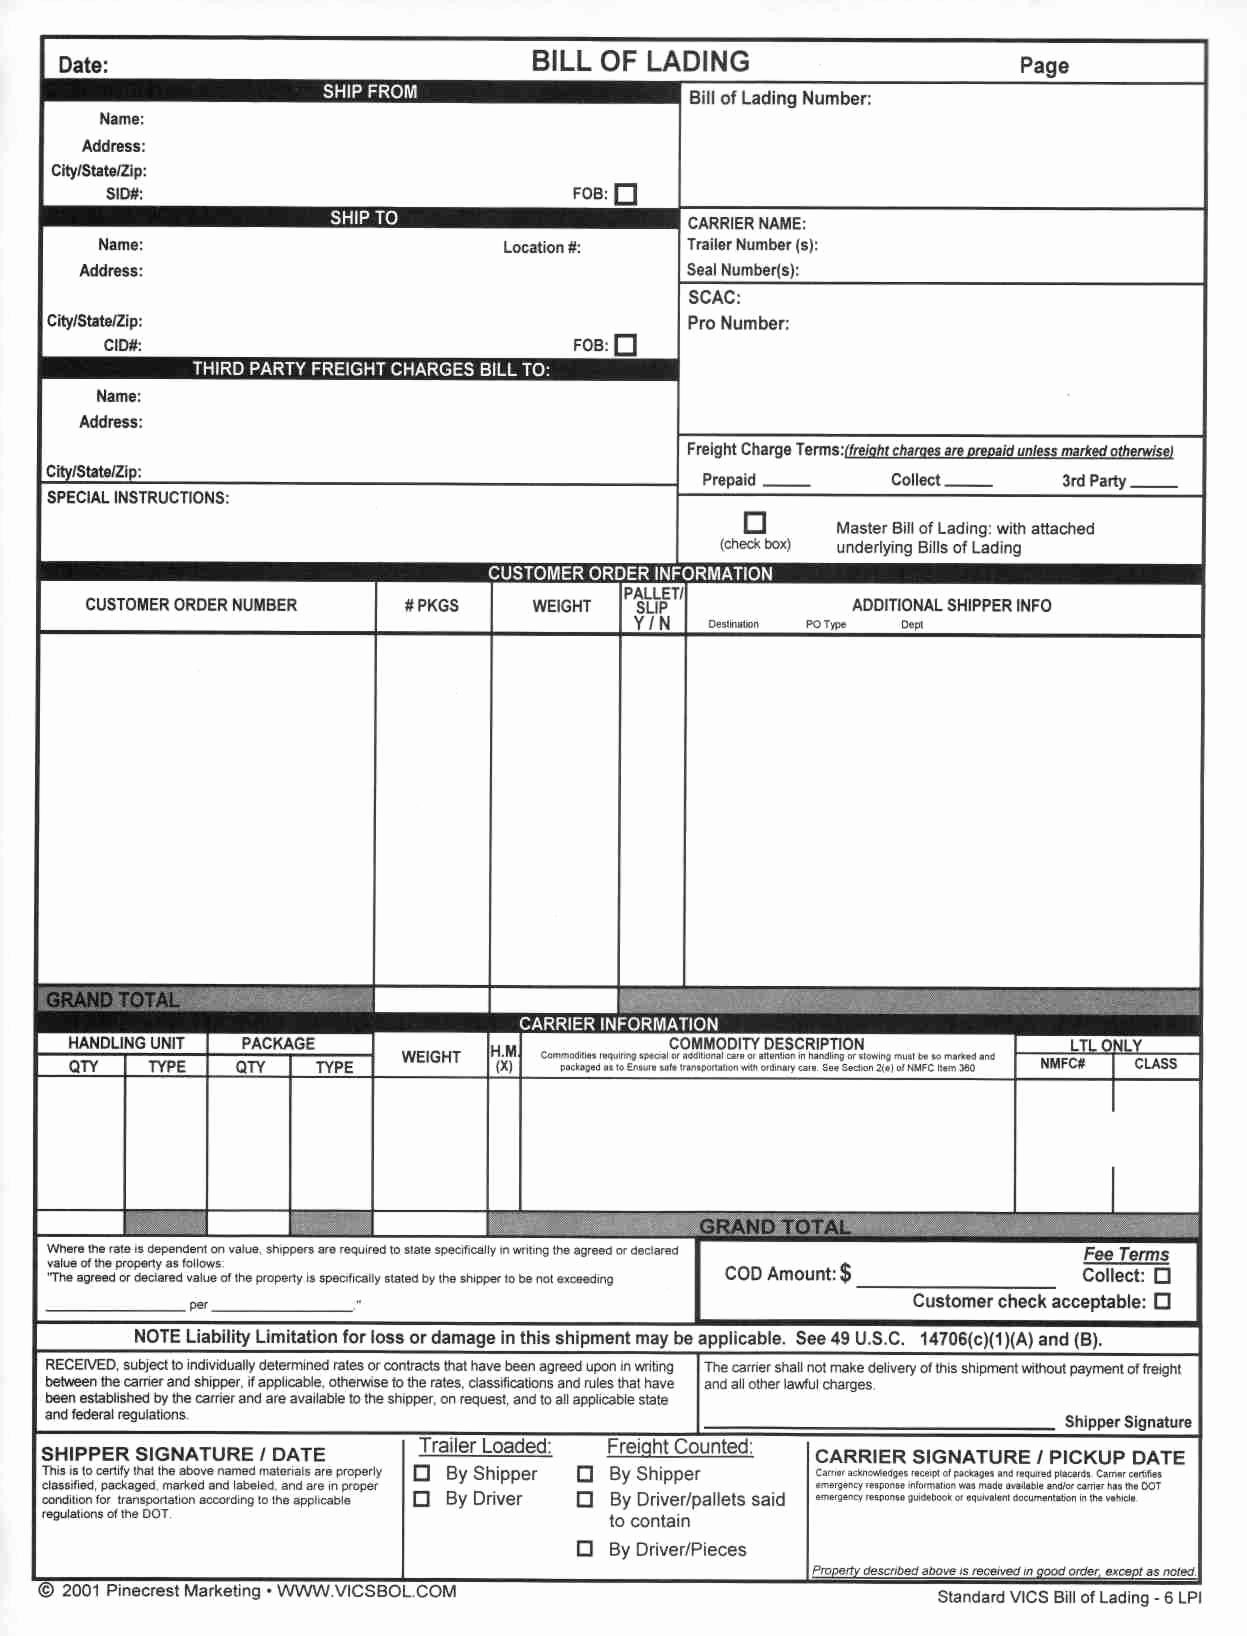 Bill Of Lading Short form Template Best Of Bill Of Lading Templates